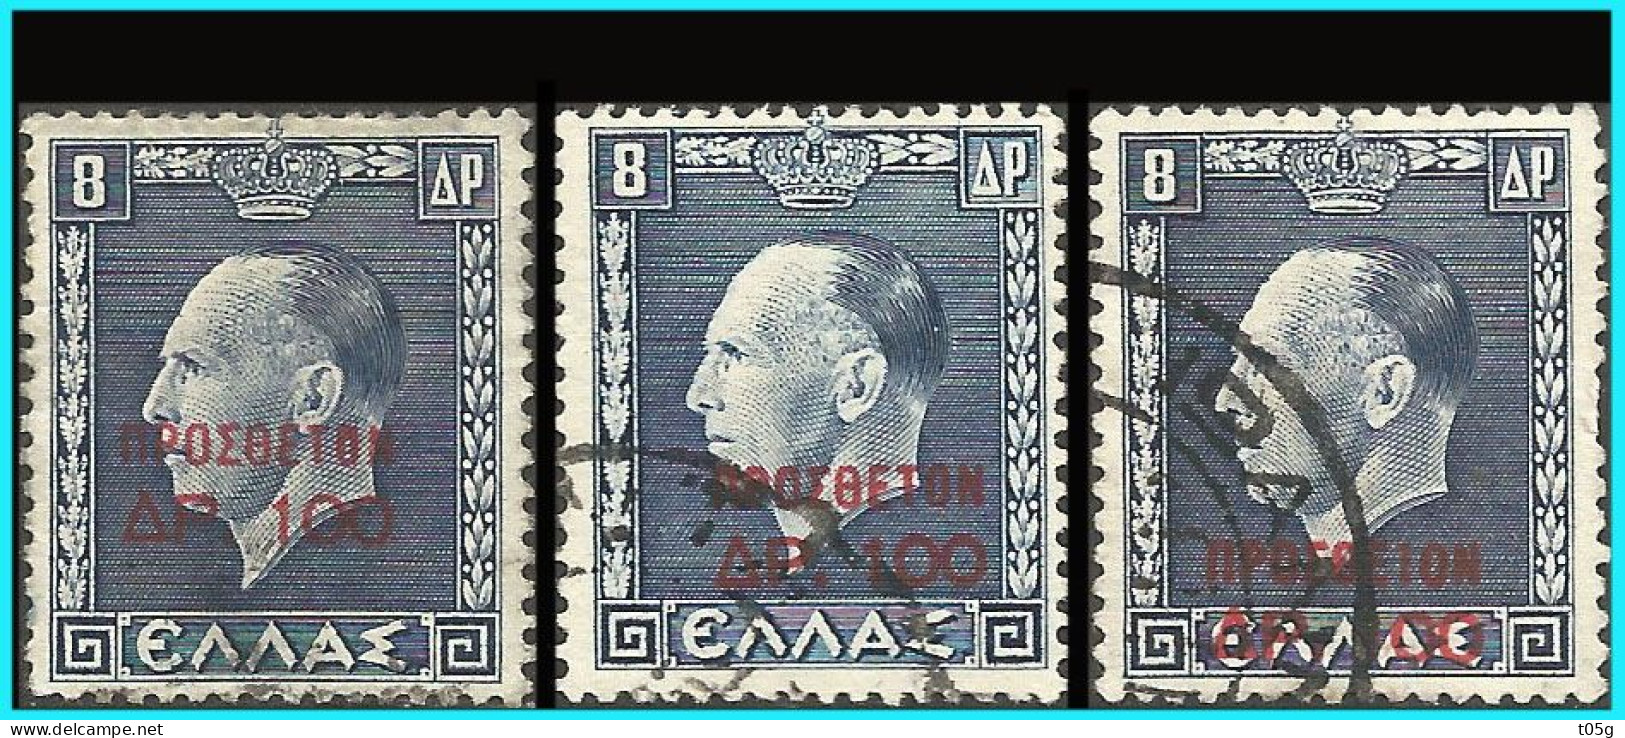 GREECE-GRECE-1951: overprints Reading From Up To Down- Charity Stamps Used - Bienfaisance